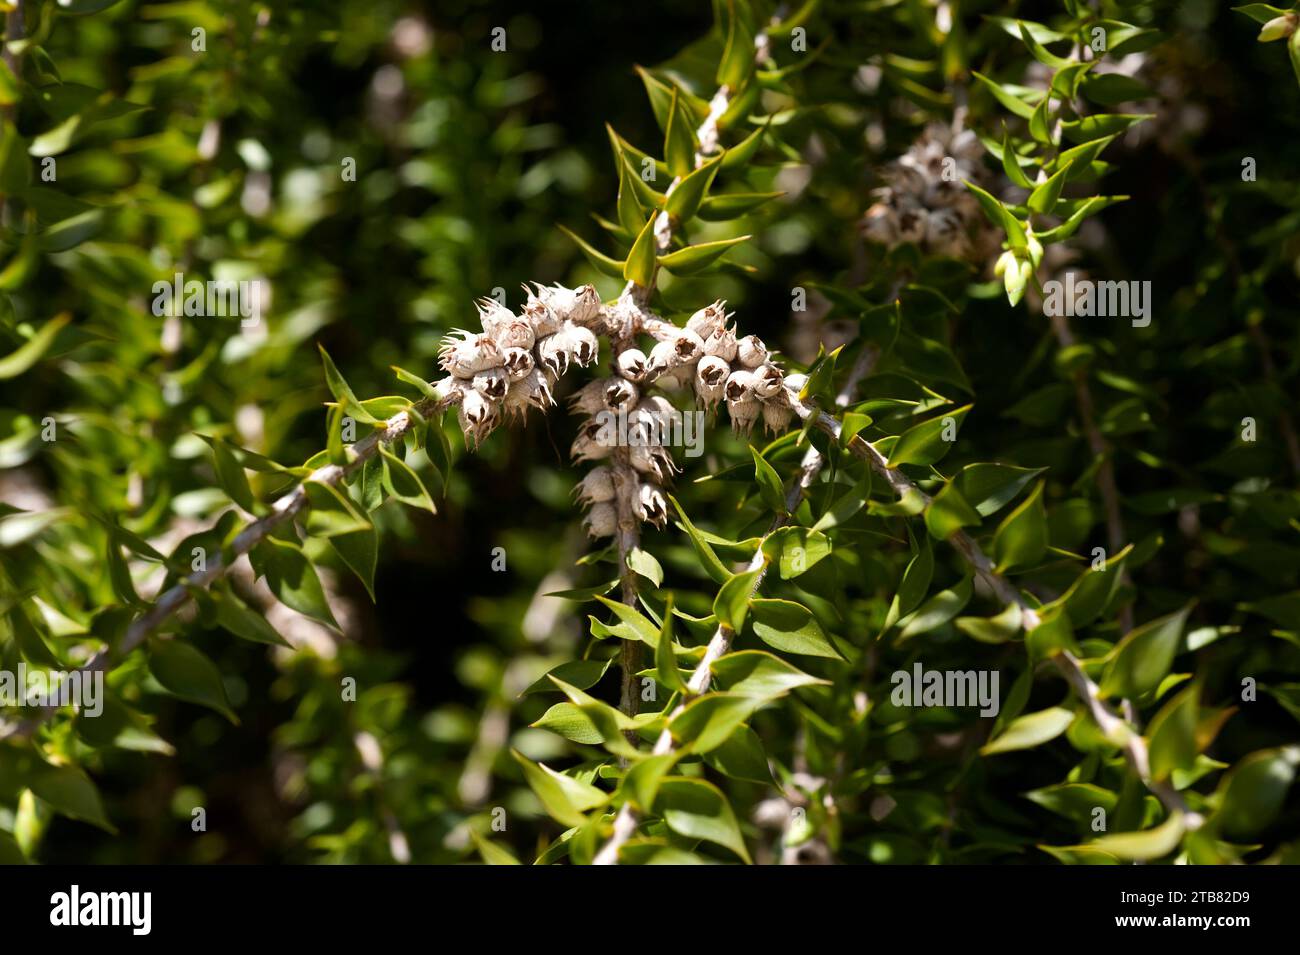 Prickly paperbark (Melaleuca styphelioides) is a tree native to Australia. Fruits and leaves detail. Stock Photo